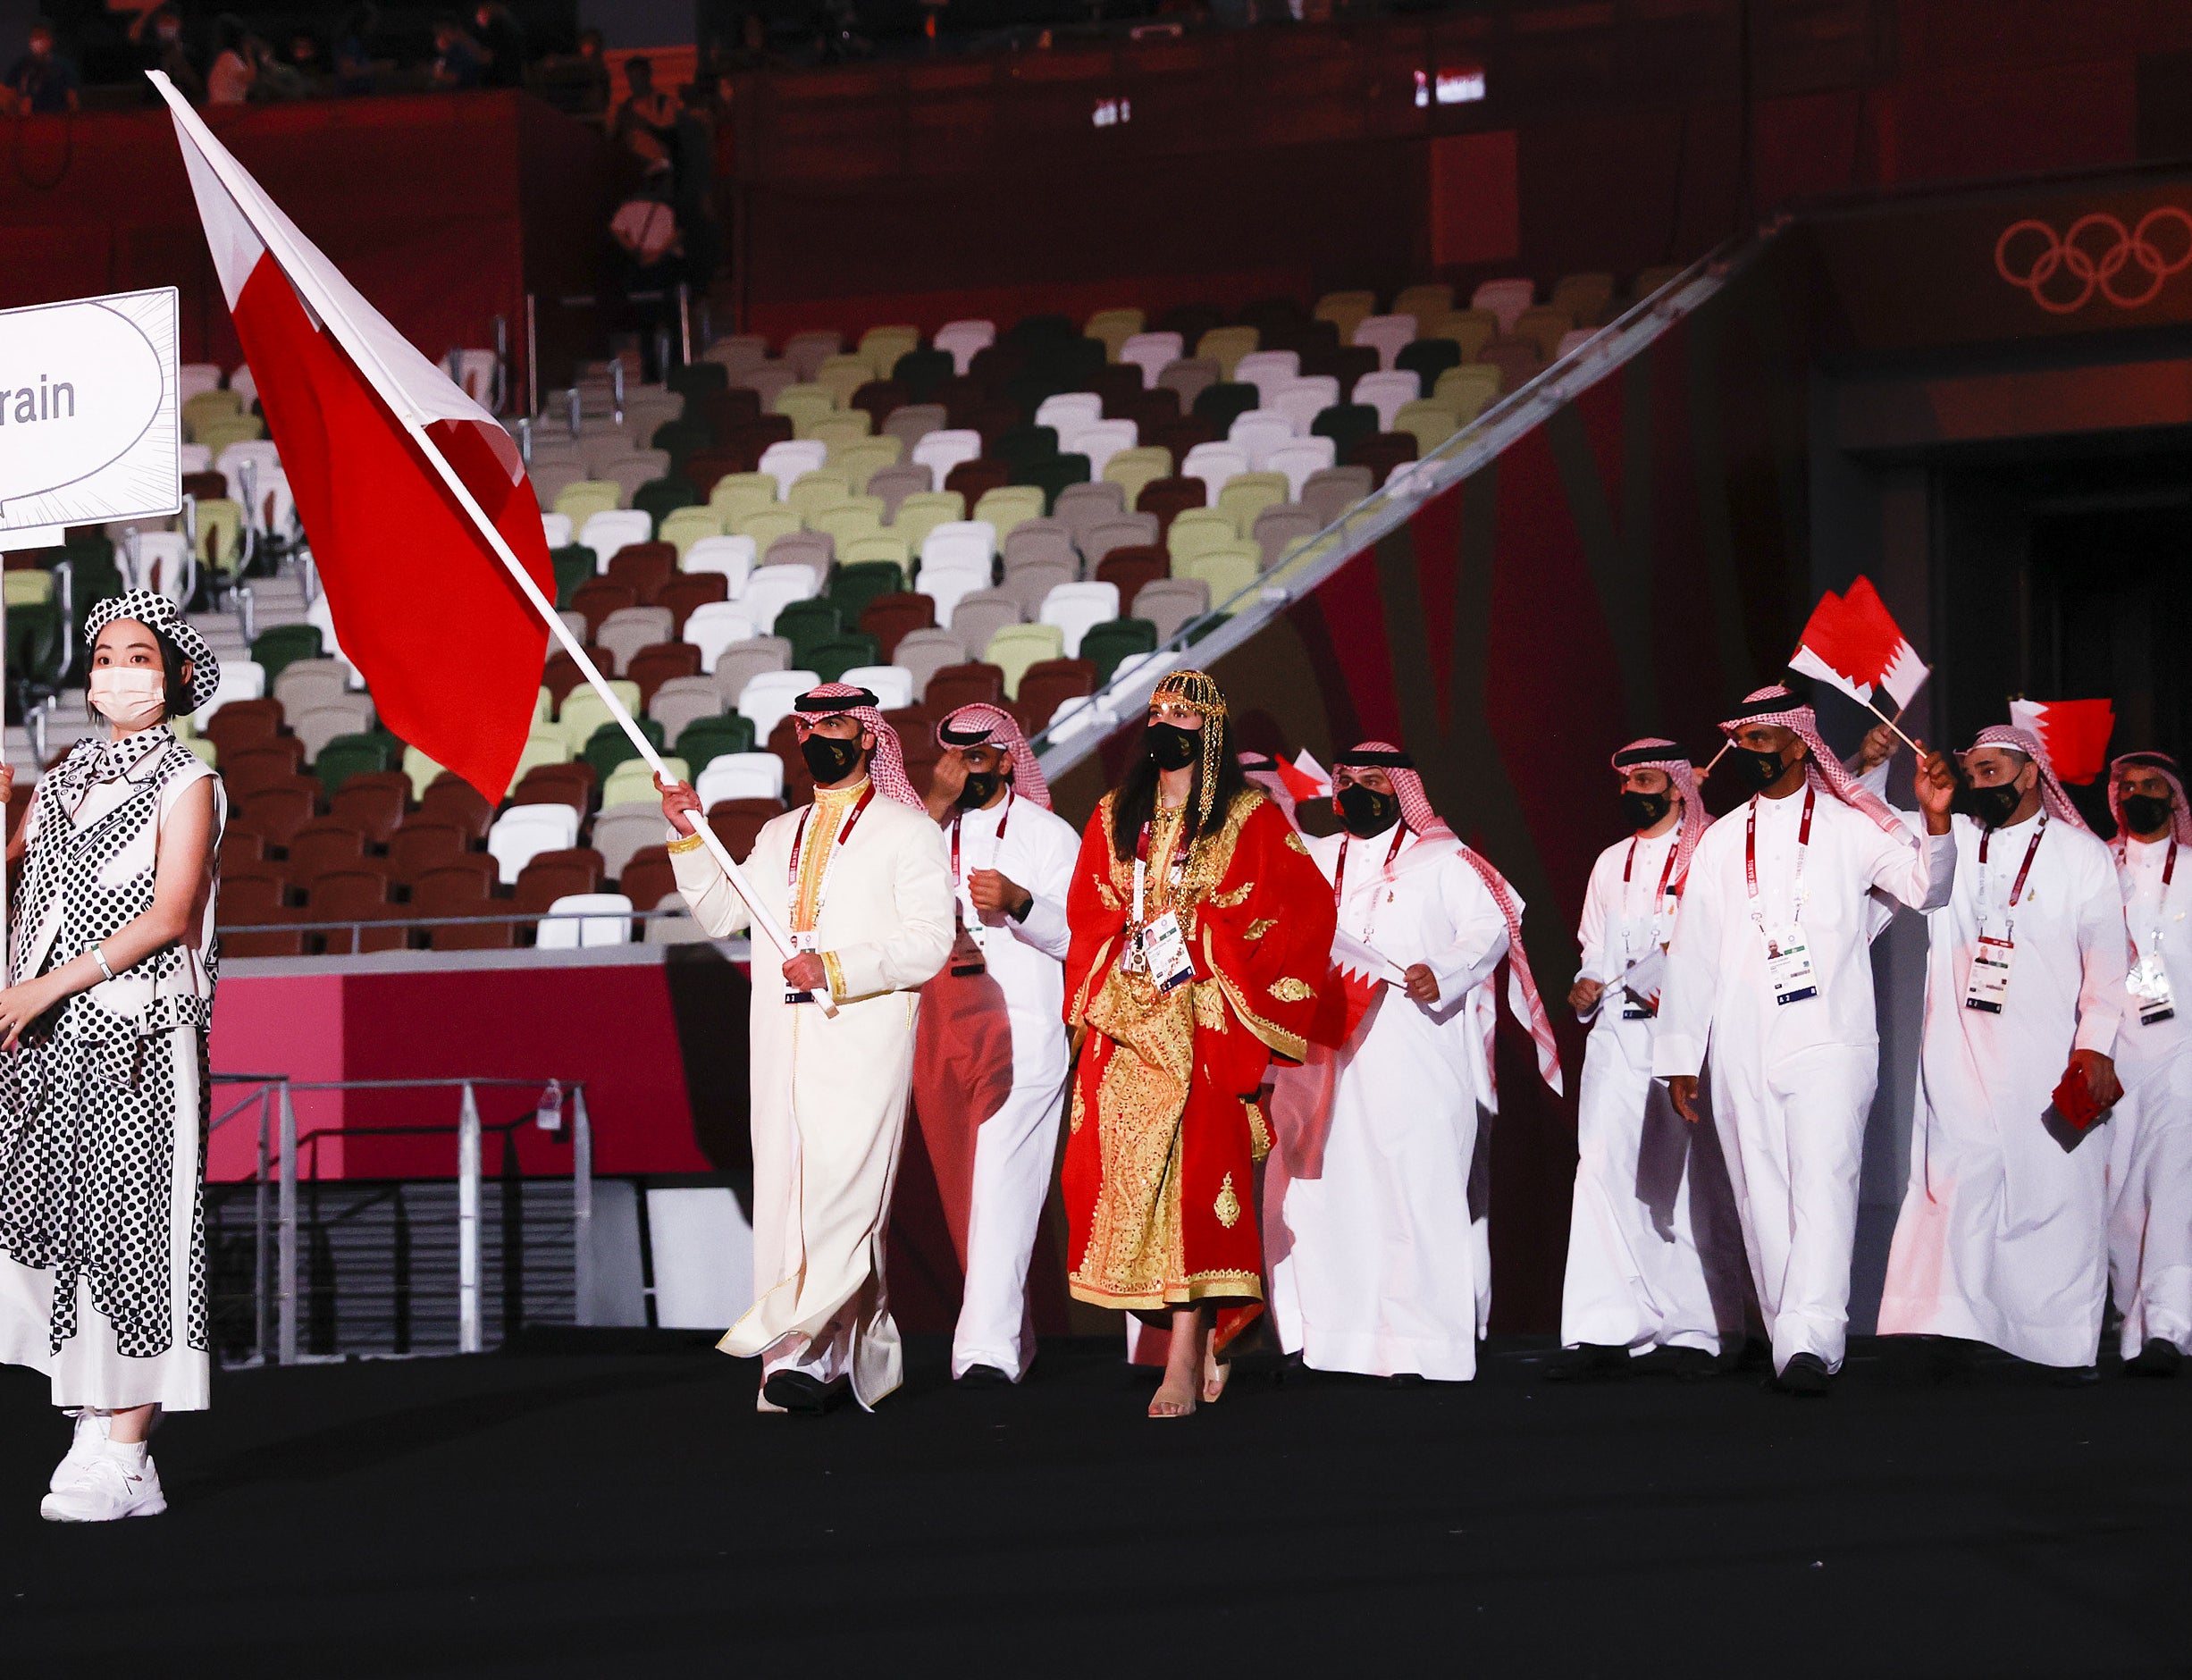 The athletes wore traditional abayas, long gowns with a hijab or thobes, long gowns traditionally worn by men